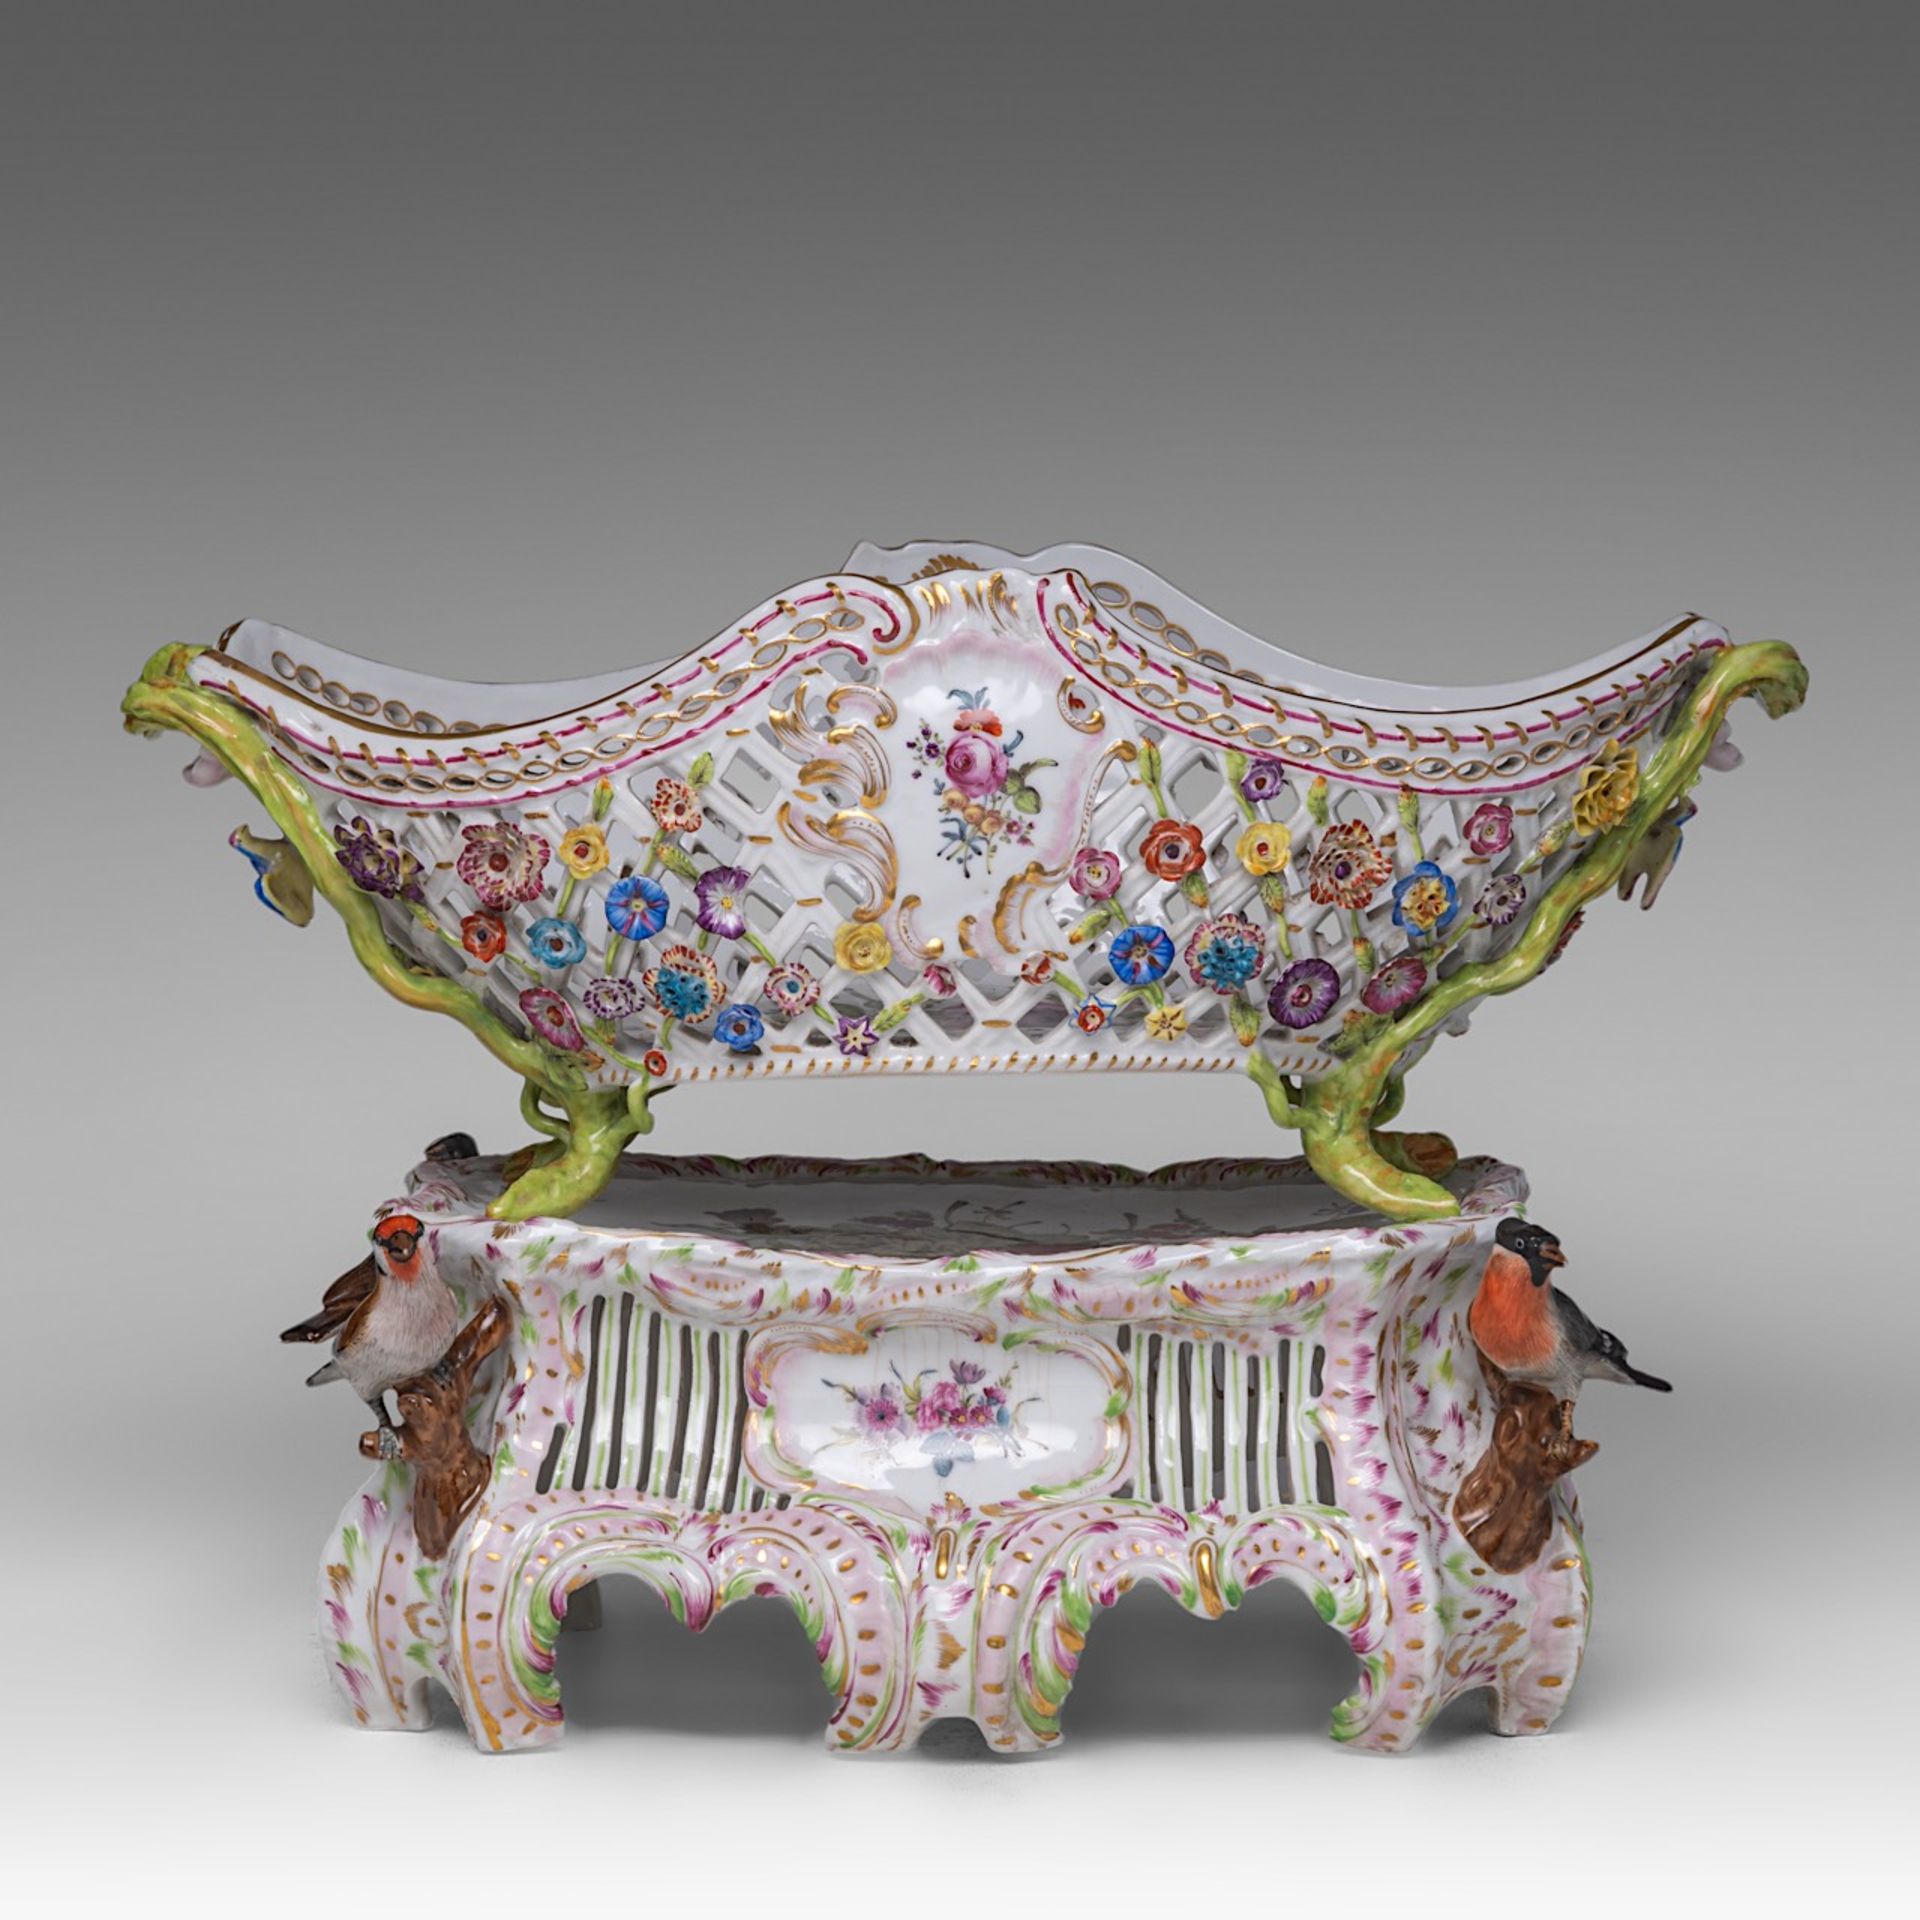 A polychrome Saxony porcelain basket on stand, decorated with modelled birds and flowers, H 33 - W 4